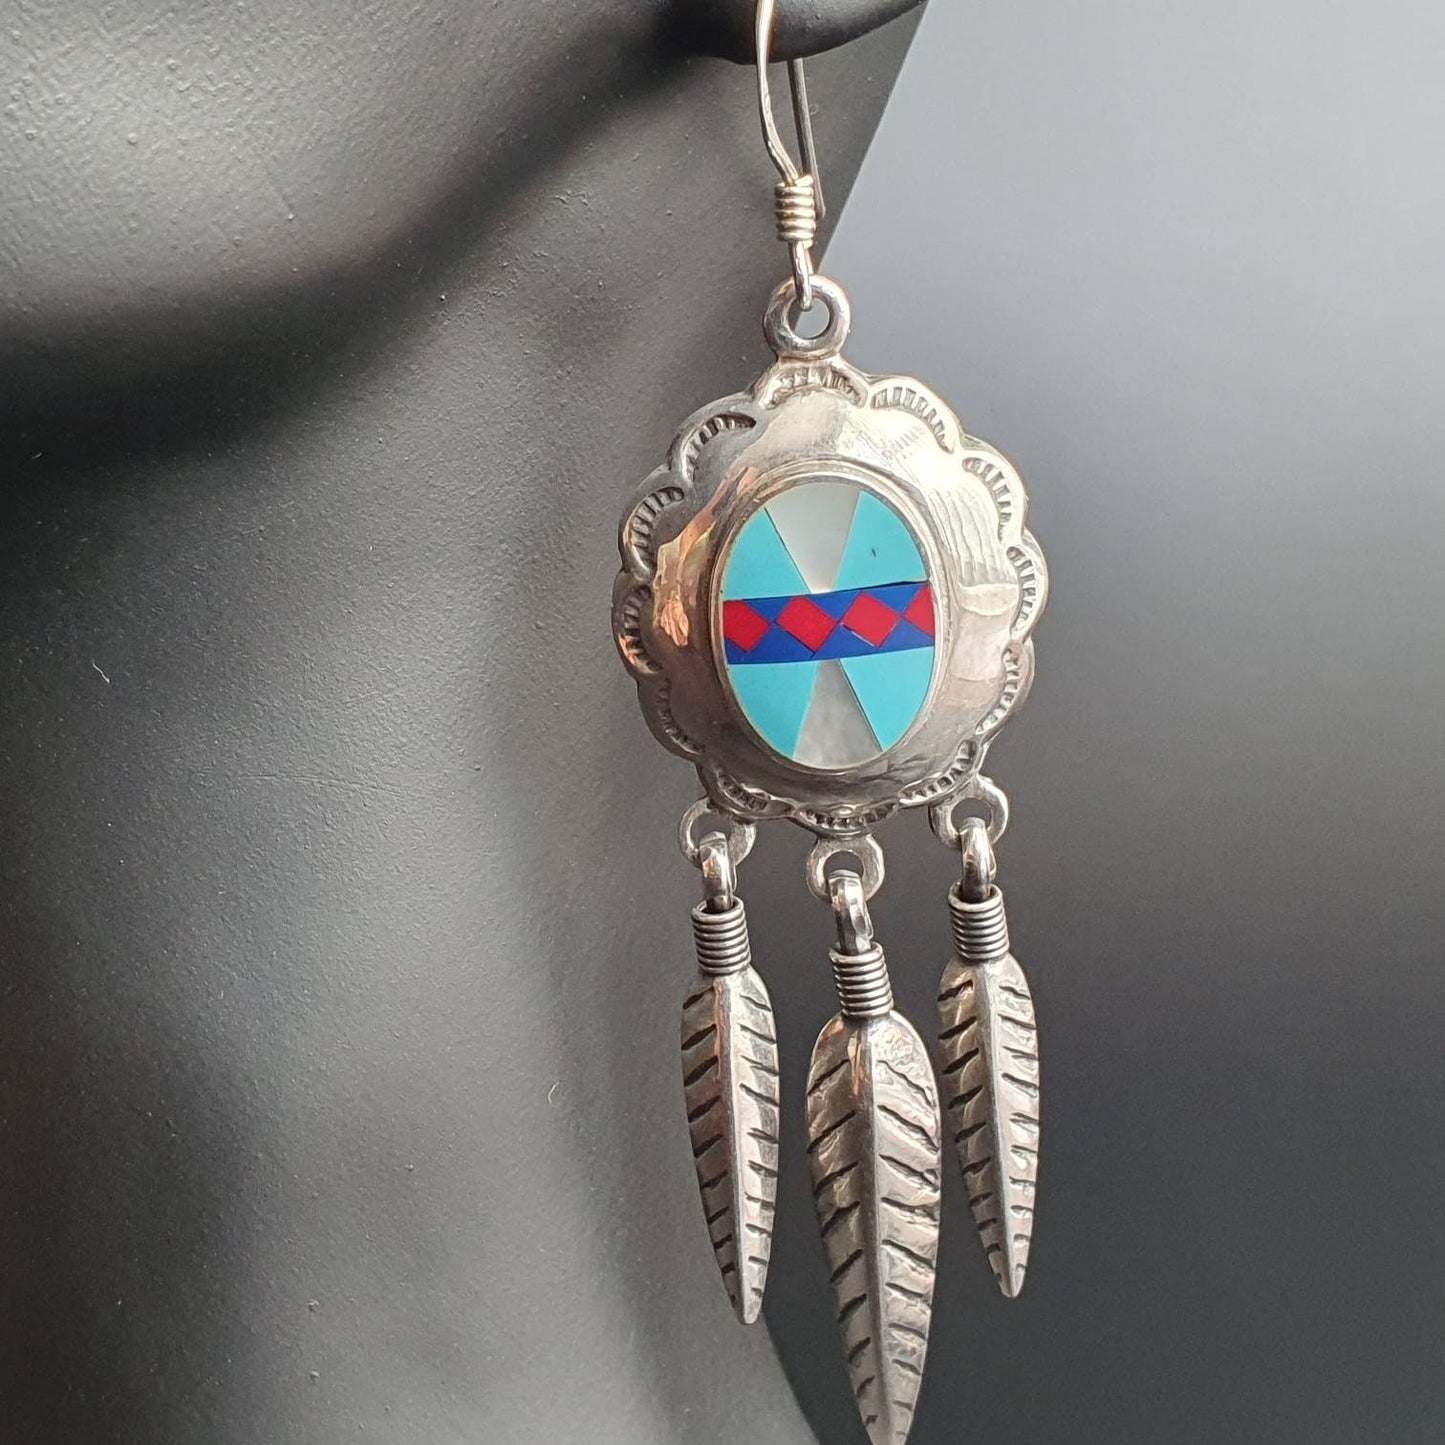 Najavo earrings, mosaic earrings, southwestern jewelry, silver collection, limited edition, bespoke earrings, sterling silver earrings,925